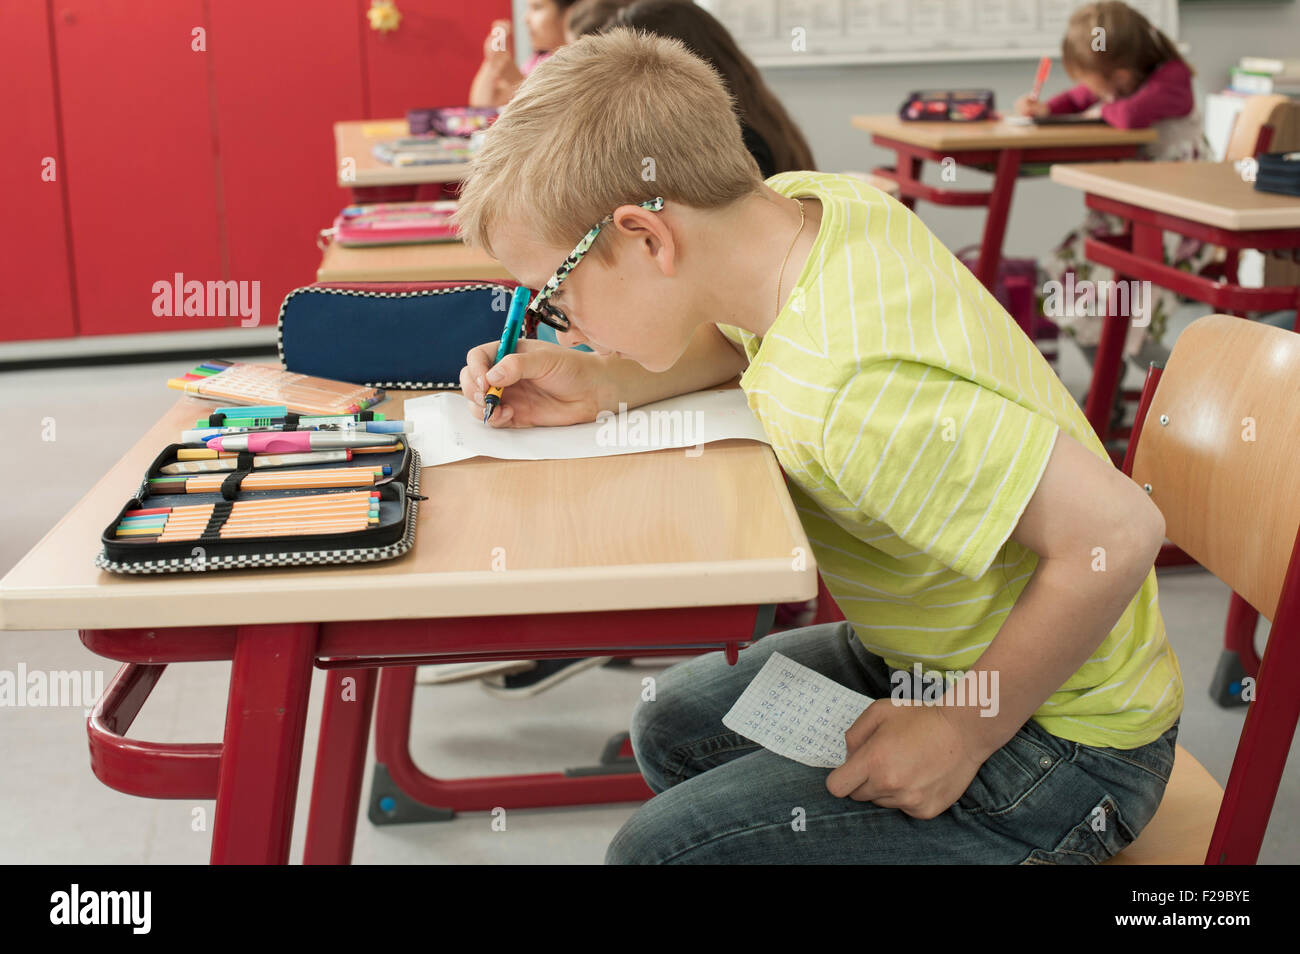 schoolboy cheating on a test in classroom, Munich, Bavaria, Germany Stock Photo